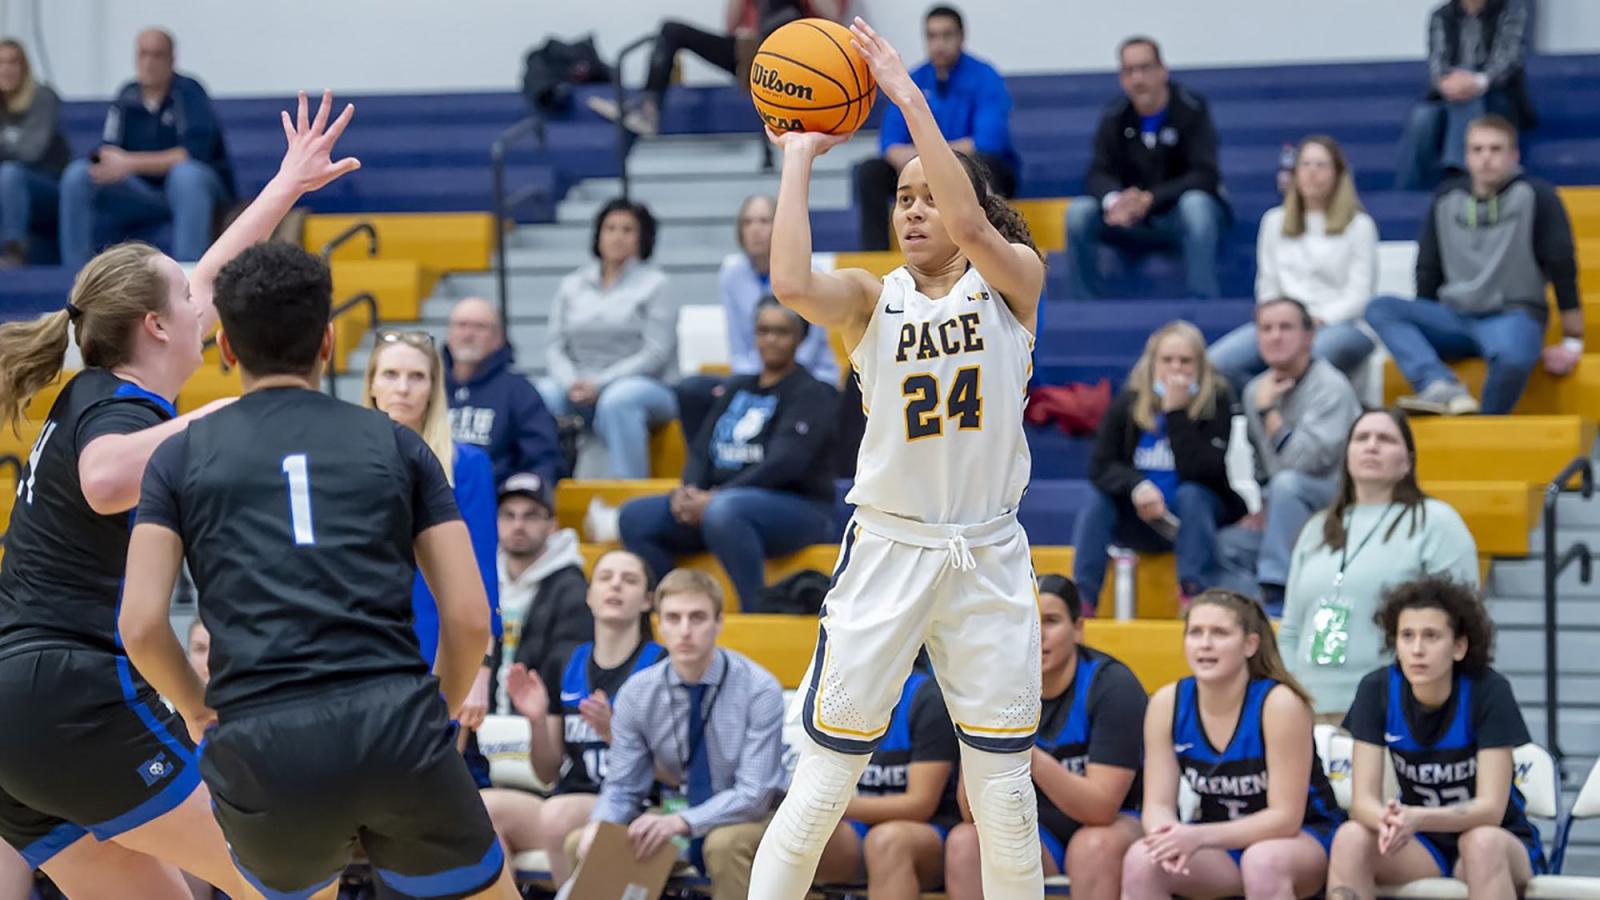 Pace women's basketball player Naya Rivera shooting over a defender